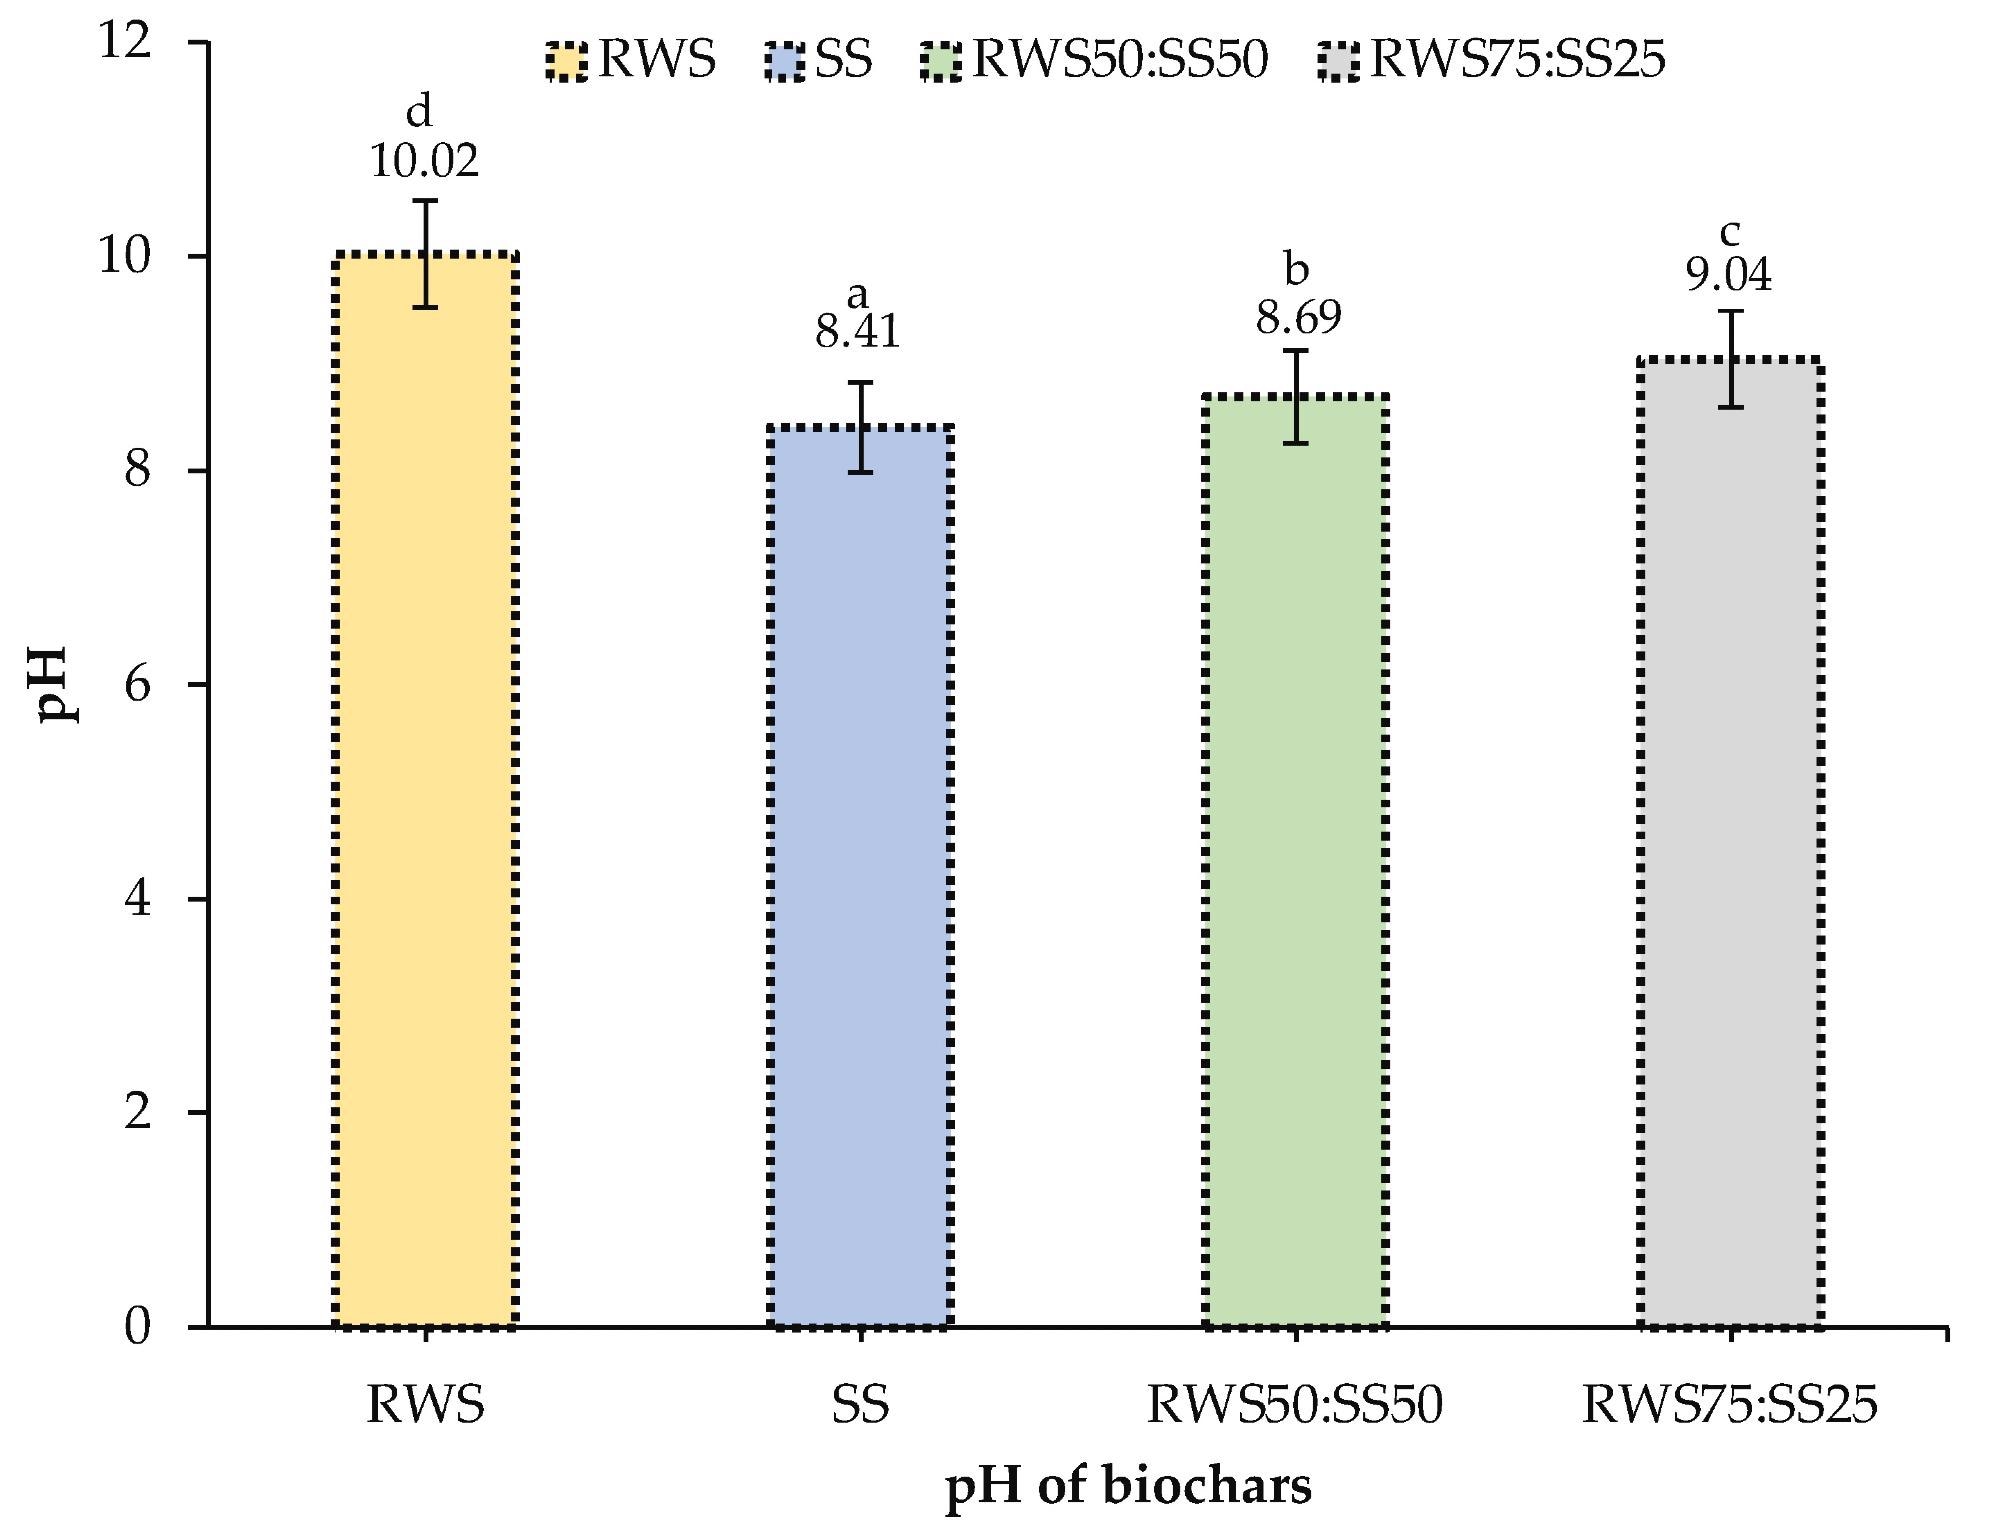 pH levels of RWS, SS, RWS50:SS50, and RWS75:SS25 biochars from pyrolysis at 550 °C. Data represent the averages and standard deviations based on triplicate experiments. Comparisons among the four treatments were significantly different (Tukey, p < 0.05) and all the treatments are indicated by lowercase letters (a–d).